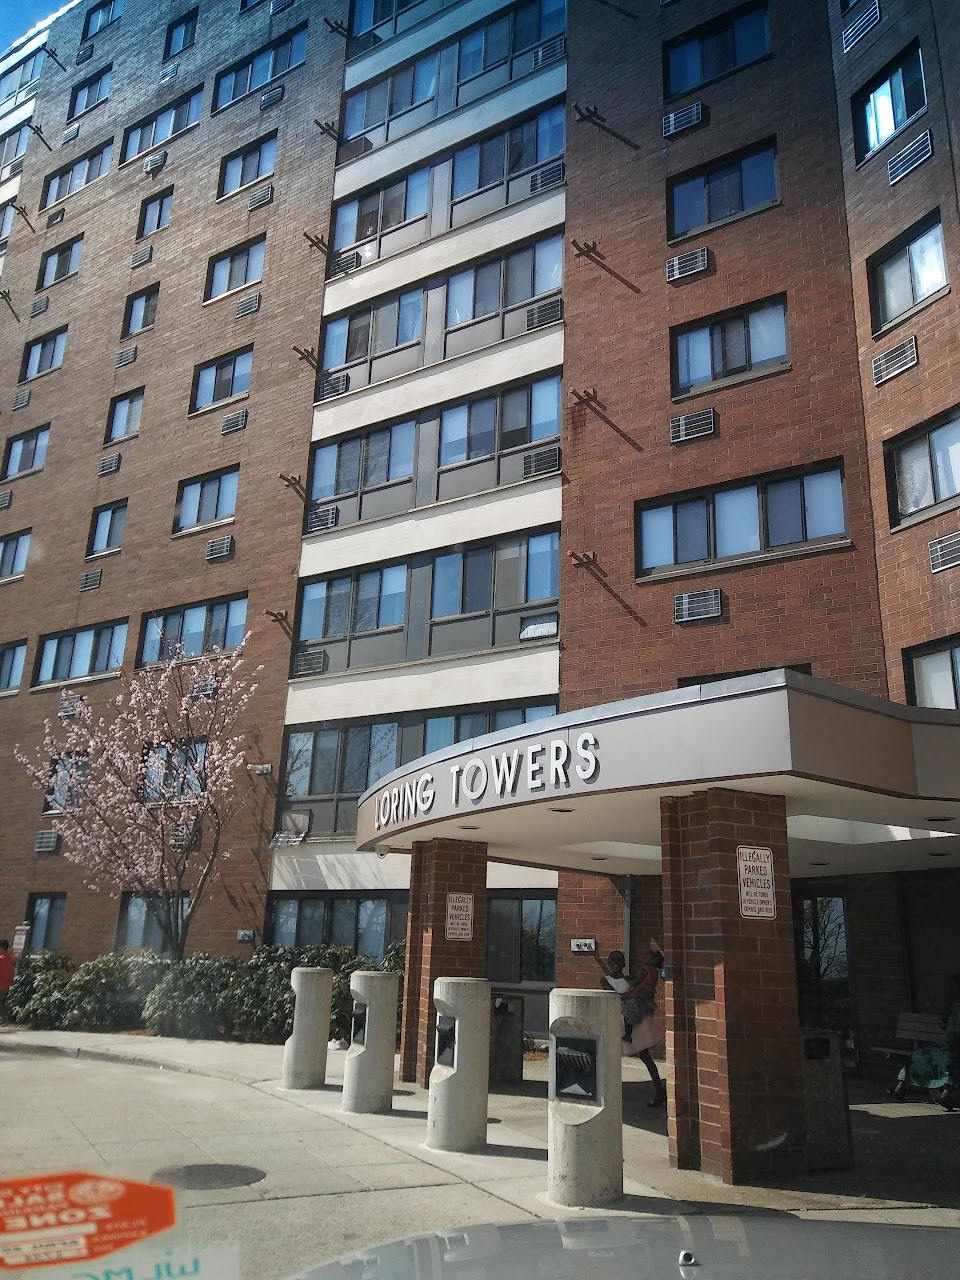 Photo of LORING TOWERS. Affordable housing located at 1000 LORING AVE SALEM, MA 01970